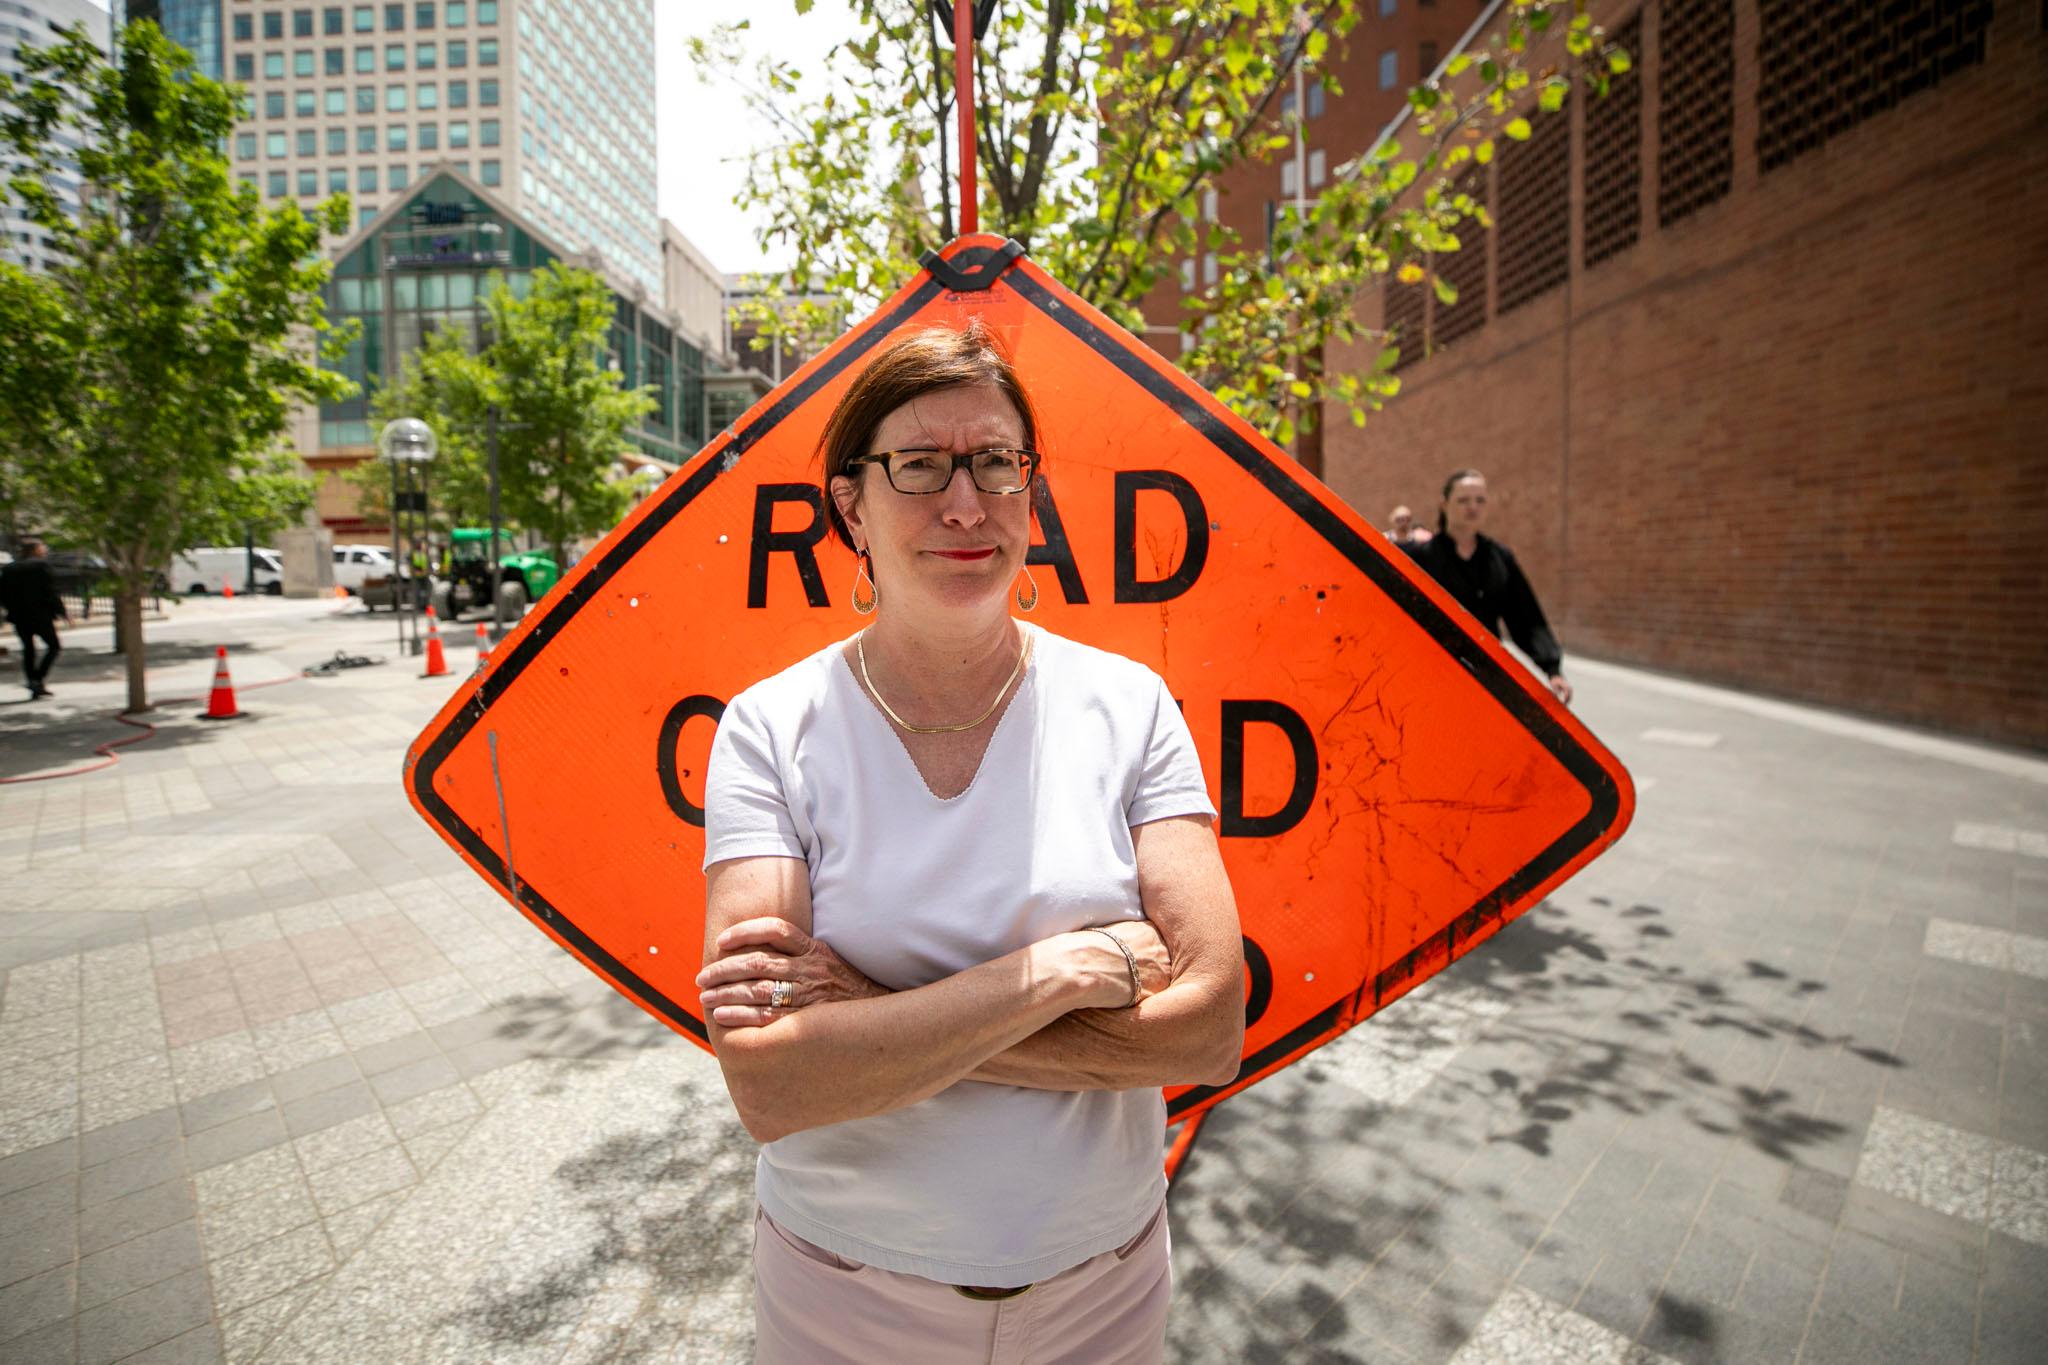 A woman with short hair, a white shirt and glasses stands in front of a construction sign with her arms crossed. The look on her face says "FRUSTRATED!"